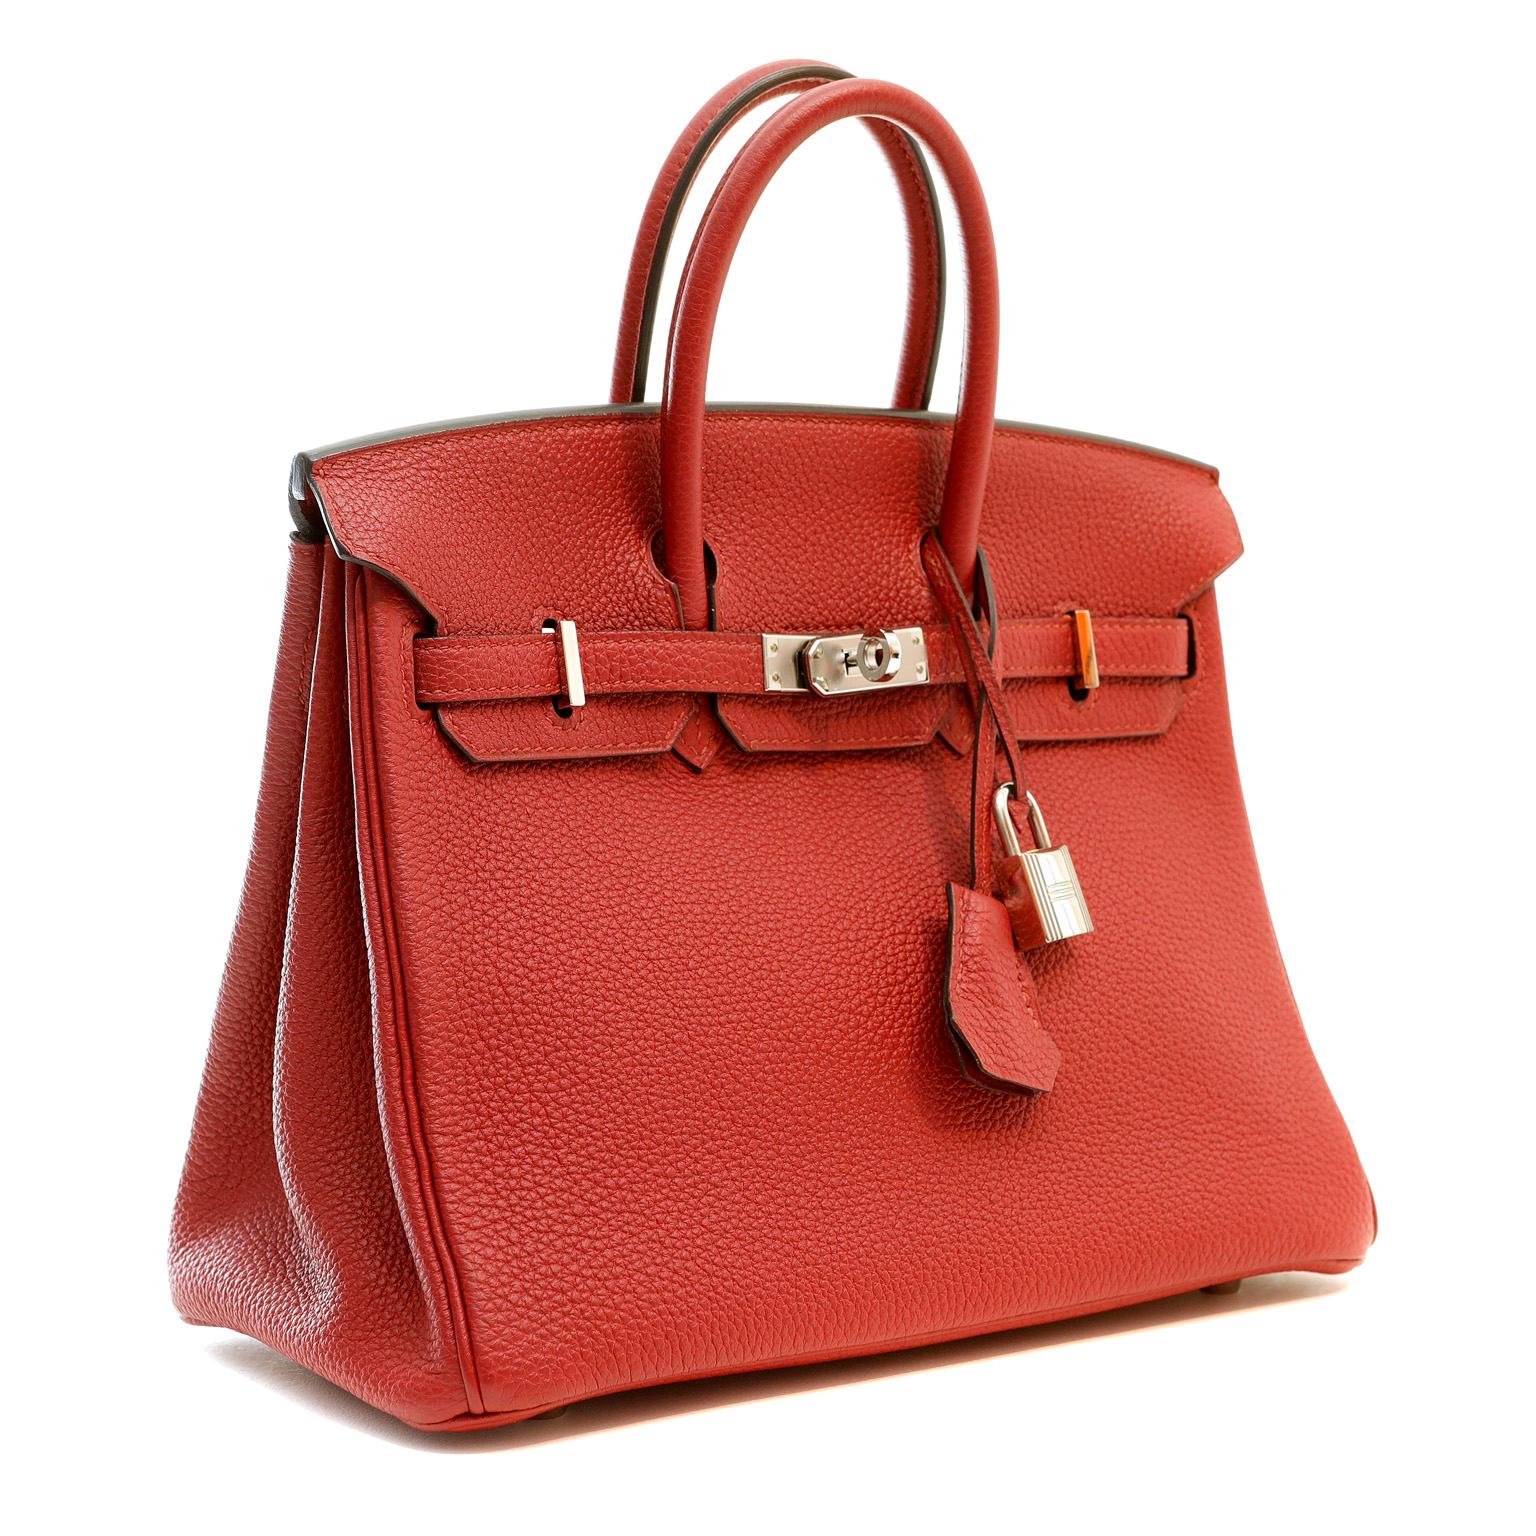 This authentic Hermès Garnet Red Togo Leather 25 cm Birkin is in pristine unworn condition with the protective plastic on the hardware.  A rich dark red, this jewel tone is perfectly paired with palladium hardware.

Togo is scratch resistant calf